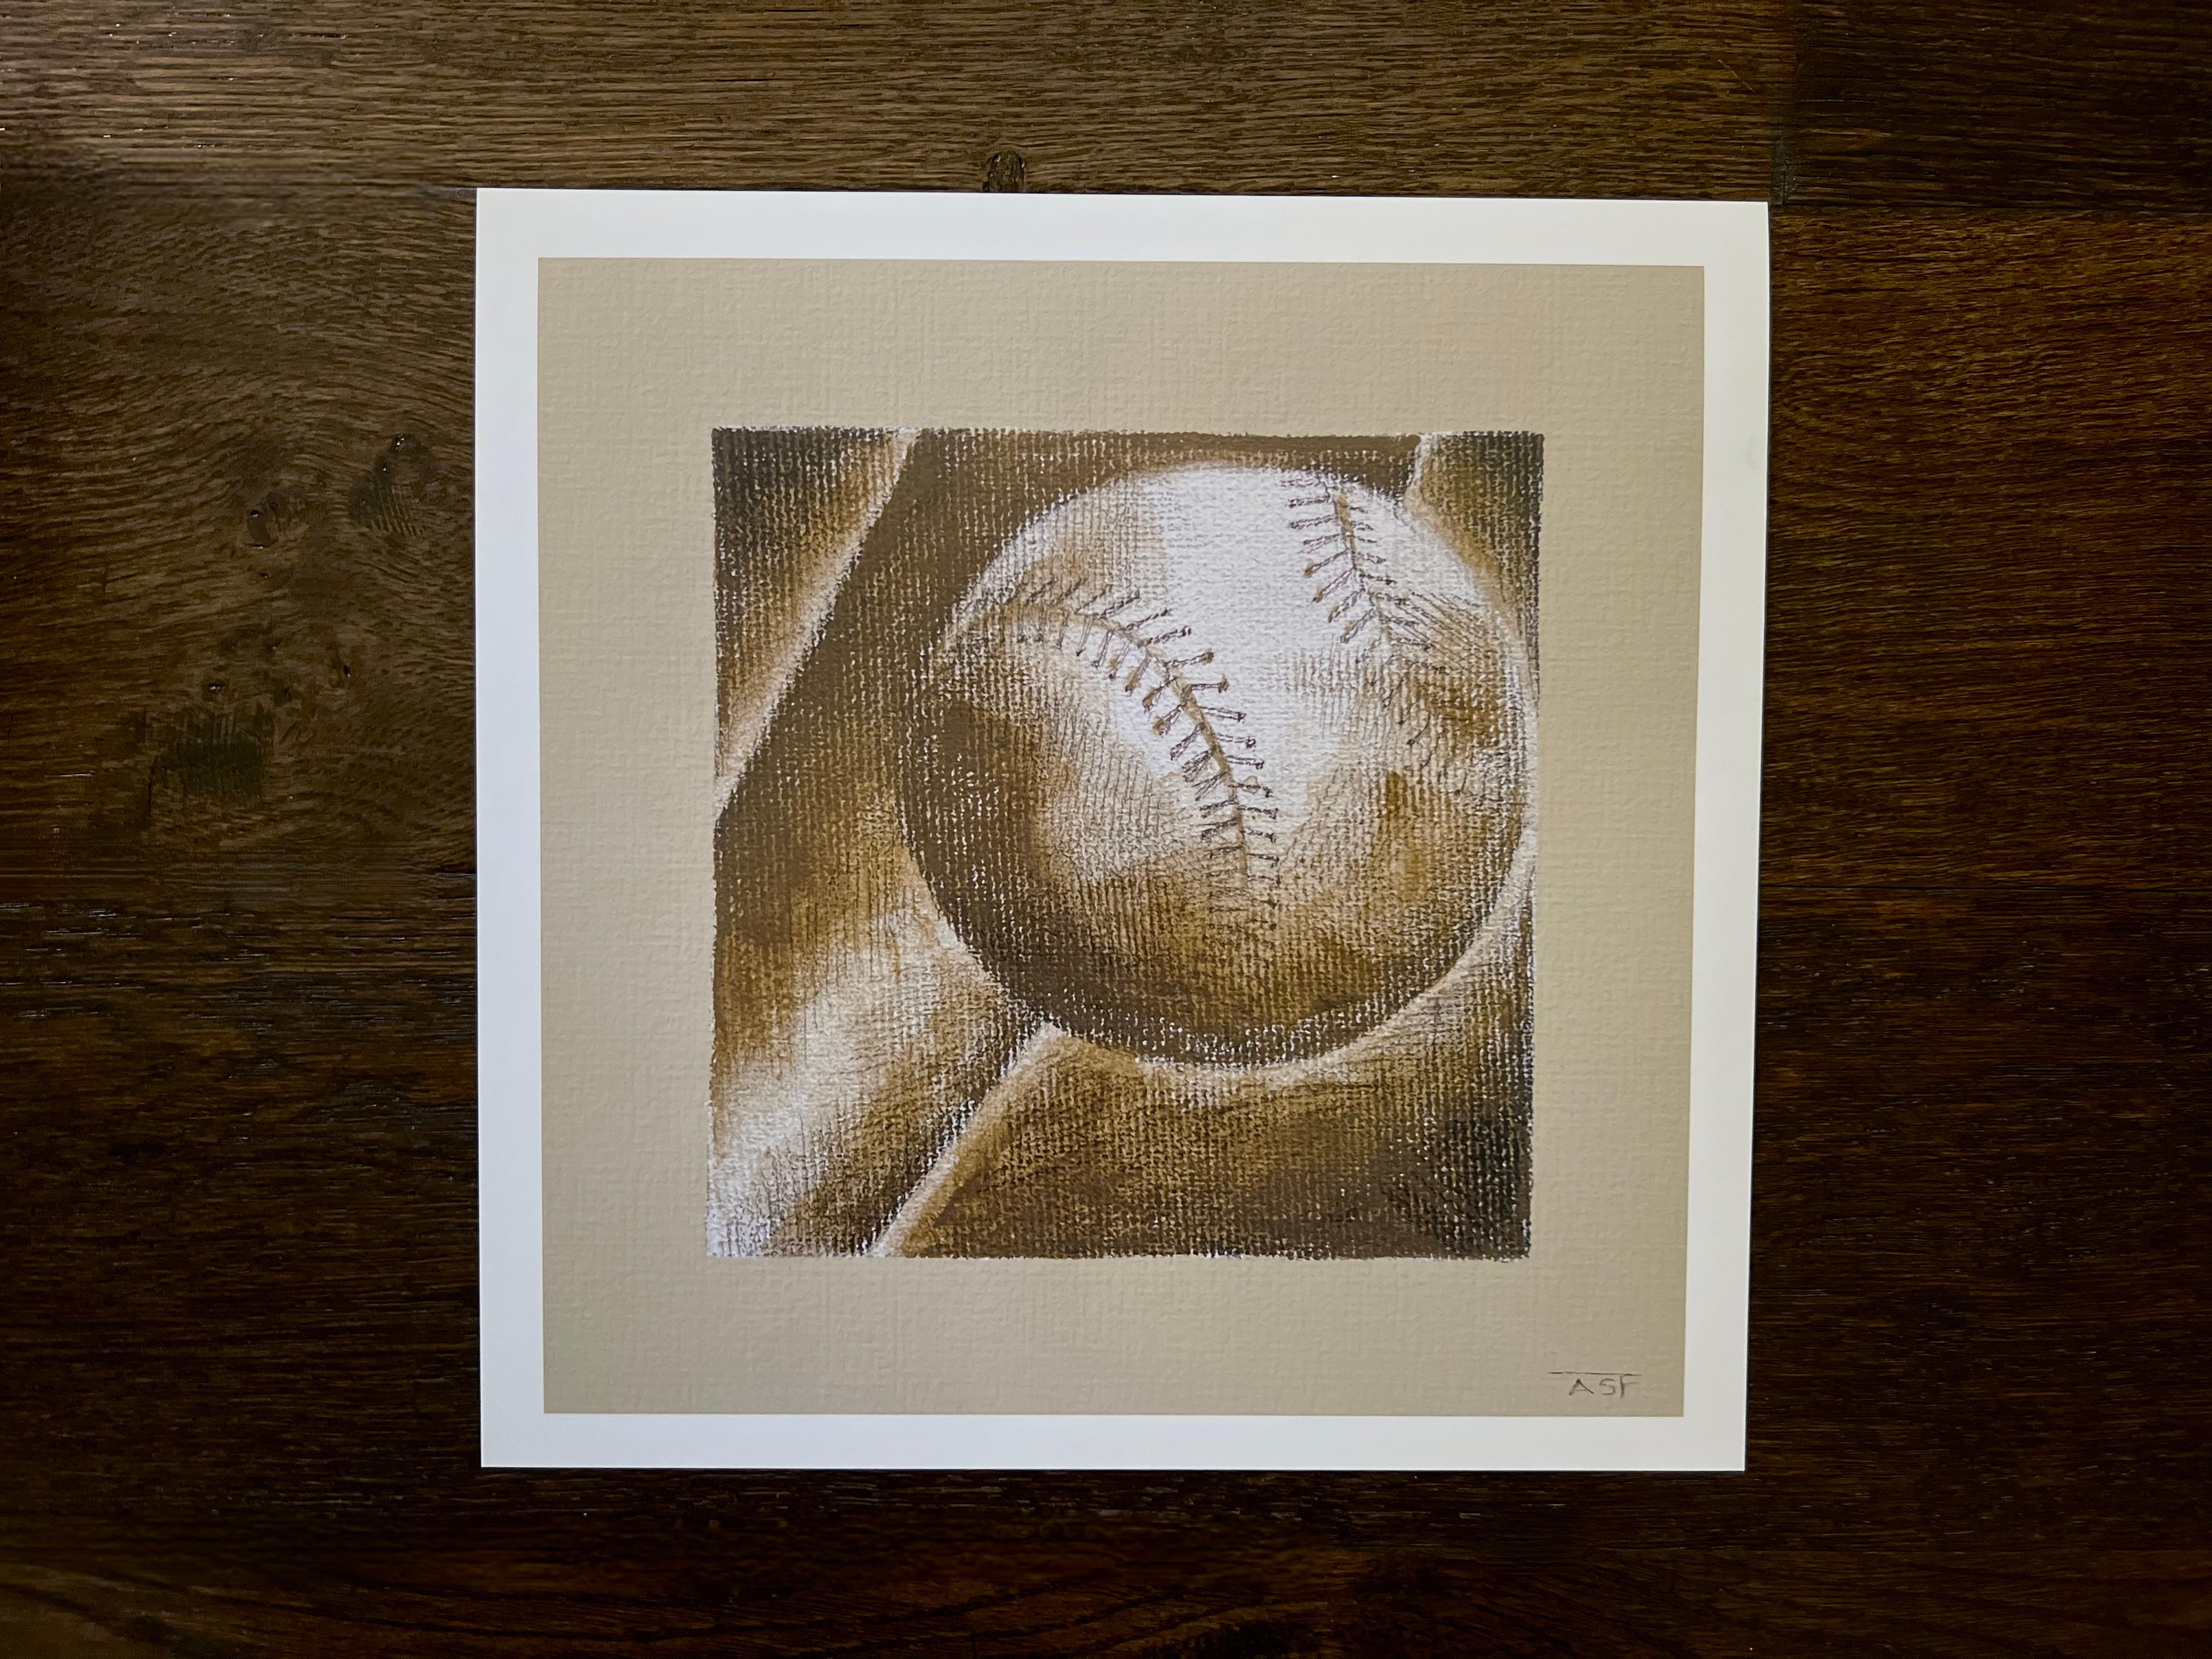 This Art Print on recycled paper features a baseball image for the one's who love the game. The contemporary and timeless aesthetic makes it perfect for a child's room or sports room. Hand signed on back. This is #3 from a series of four sport